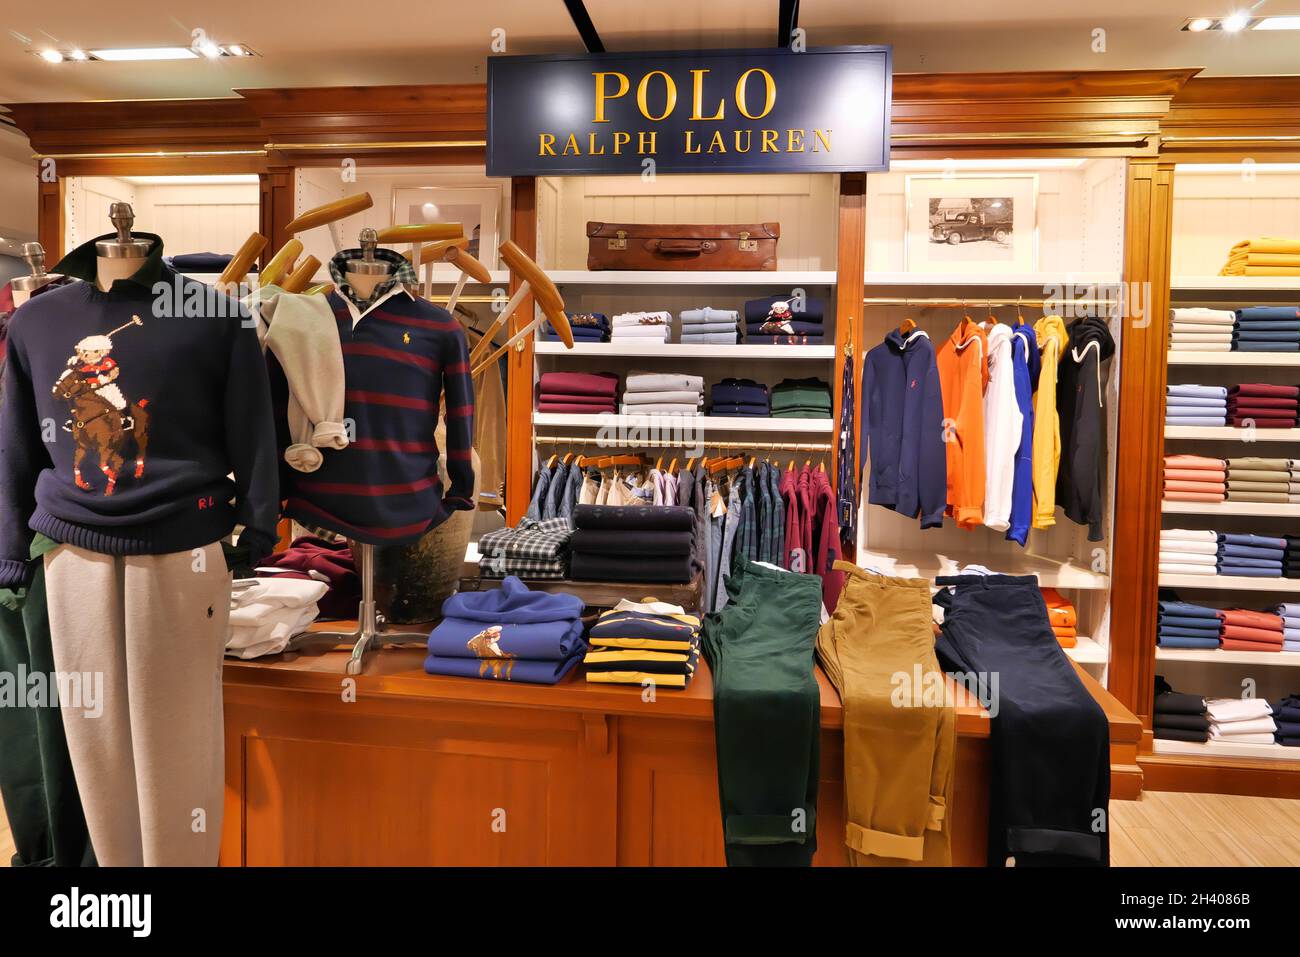 POLO RALPH LAURENT CLOTHING ON DISPLAY INSIDE THE FASHION STORE Stock Photo  - Alamy